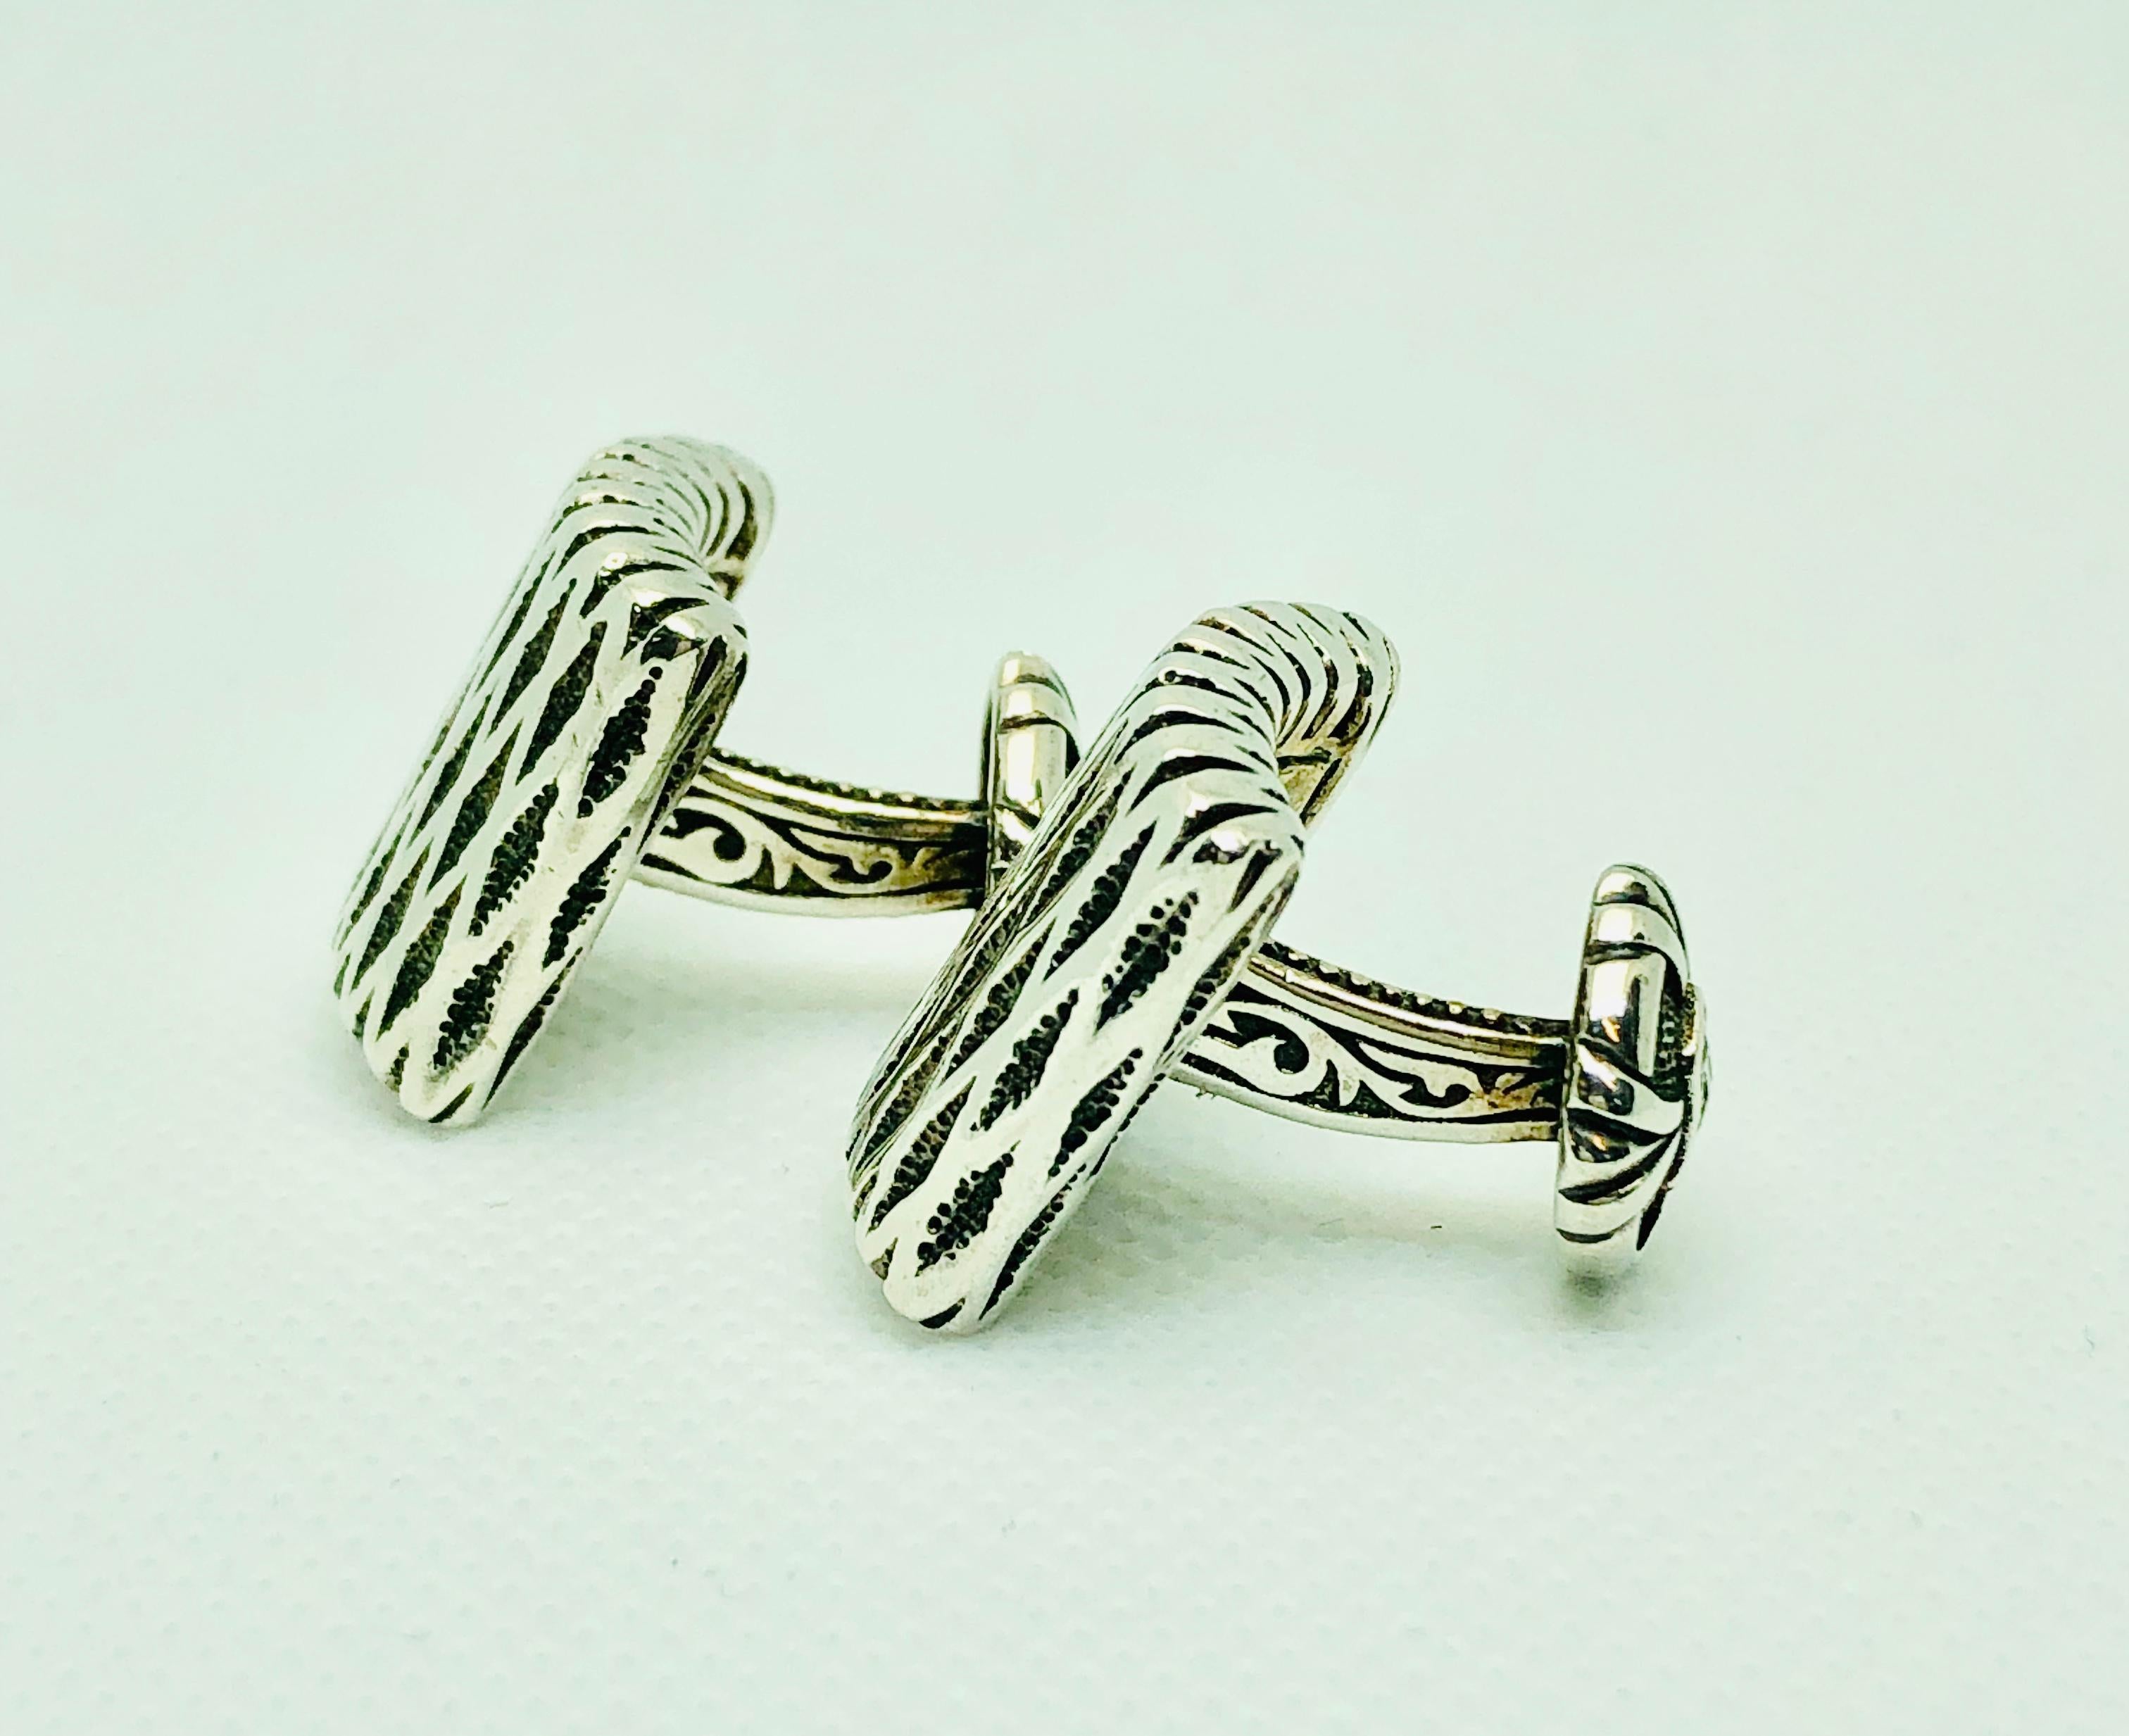 Contemporary Scott Kay Sterling Silver Square Cufflinks